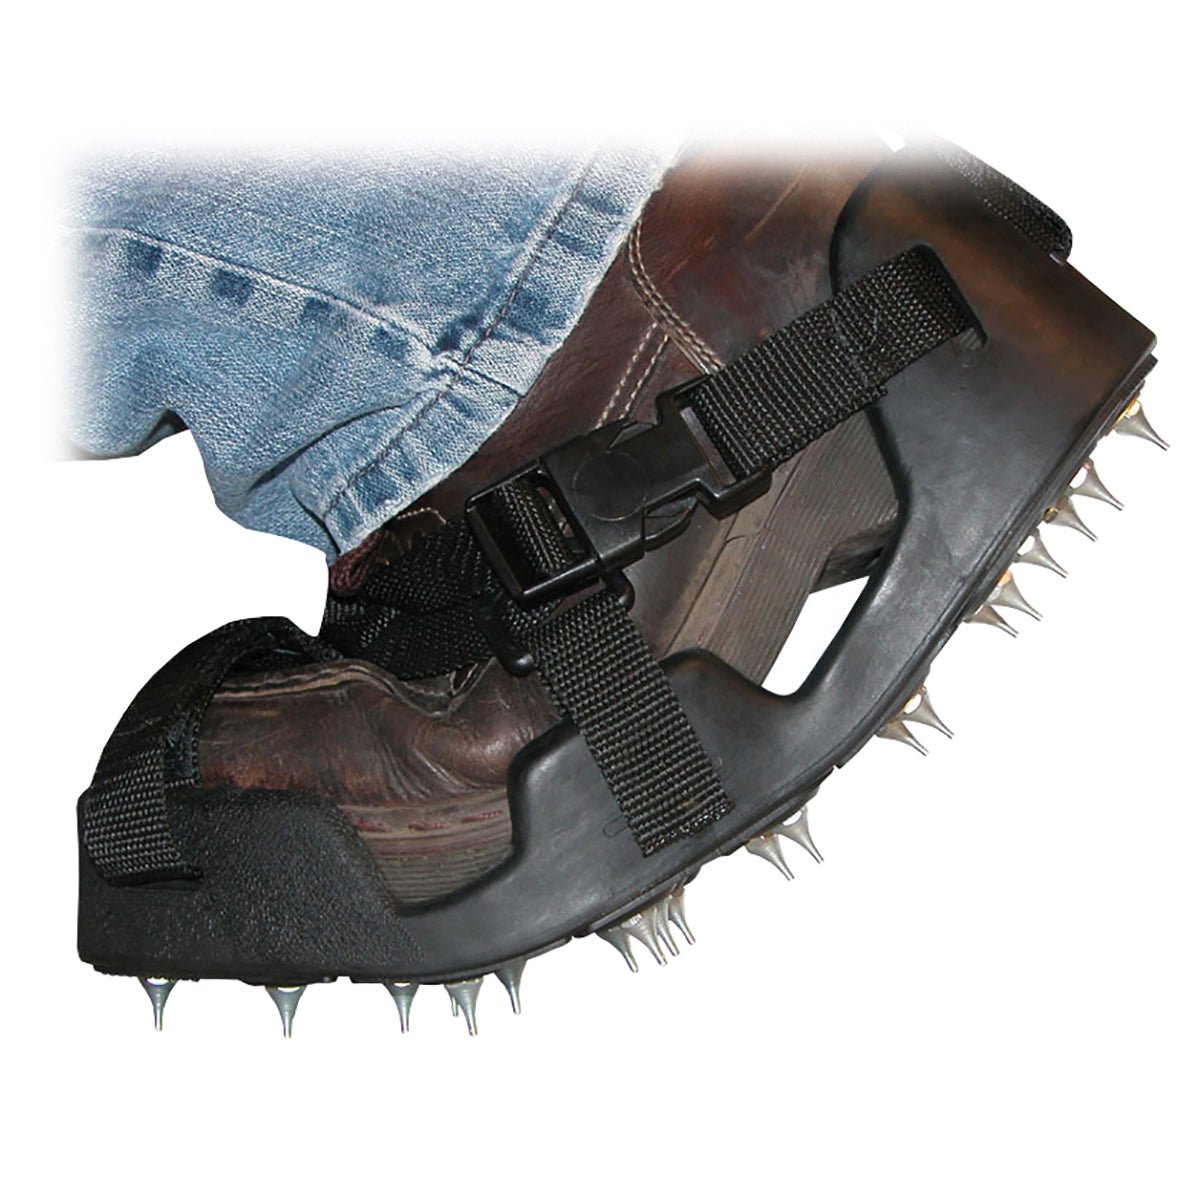 Shoe-In Spiked Shoes for Resinous Coatings - Medium